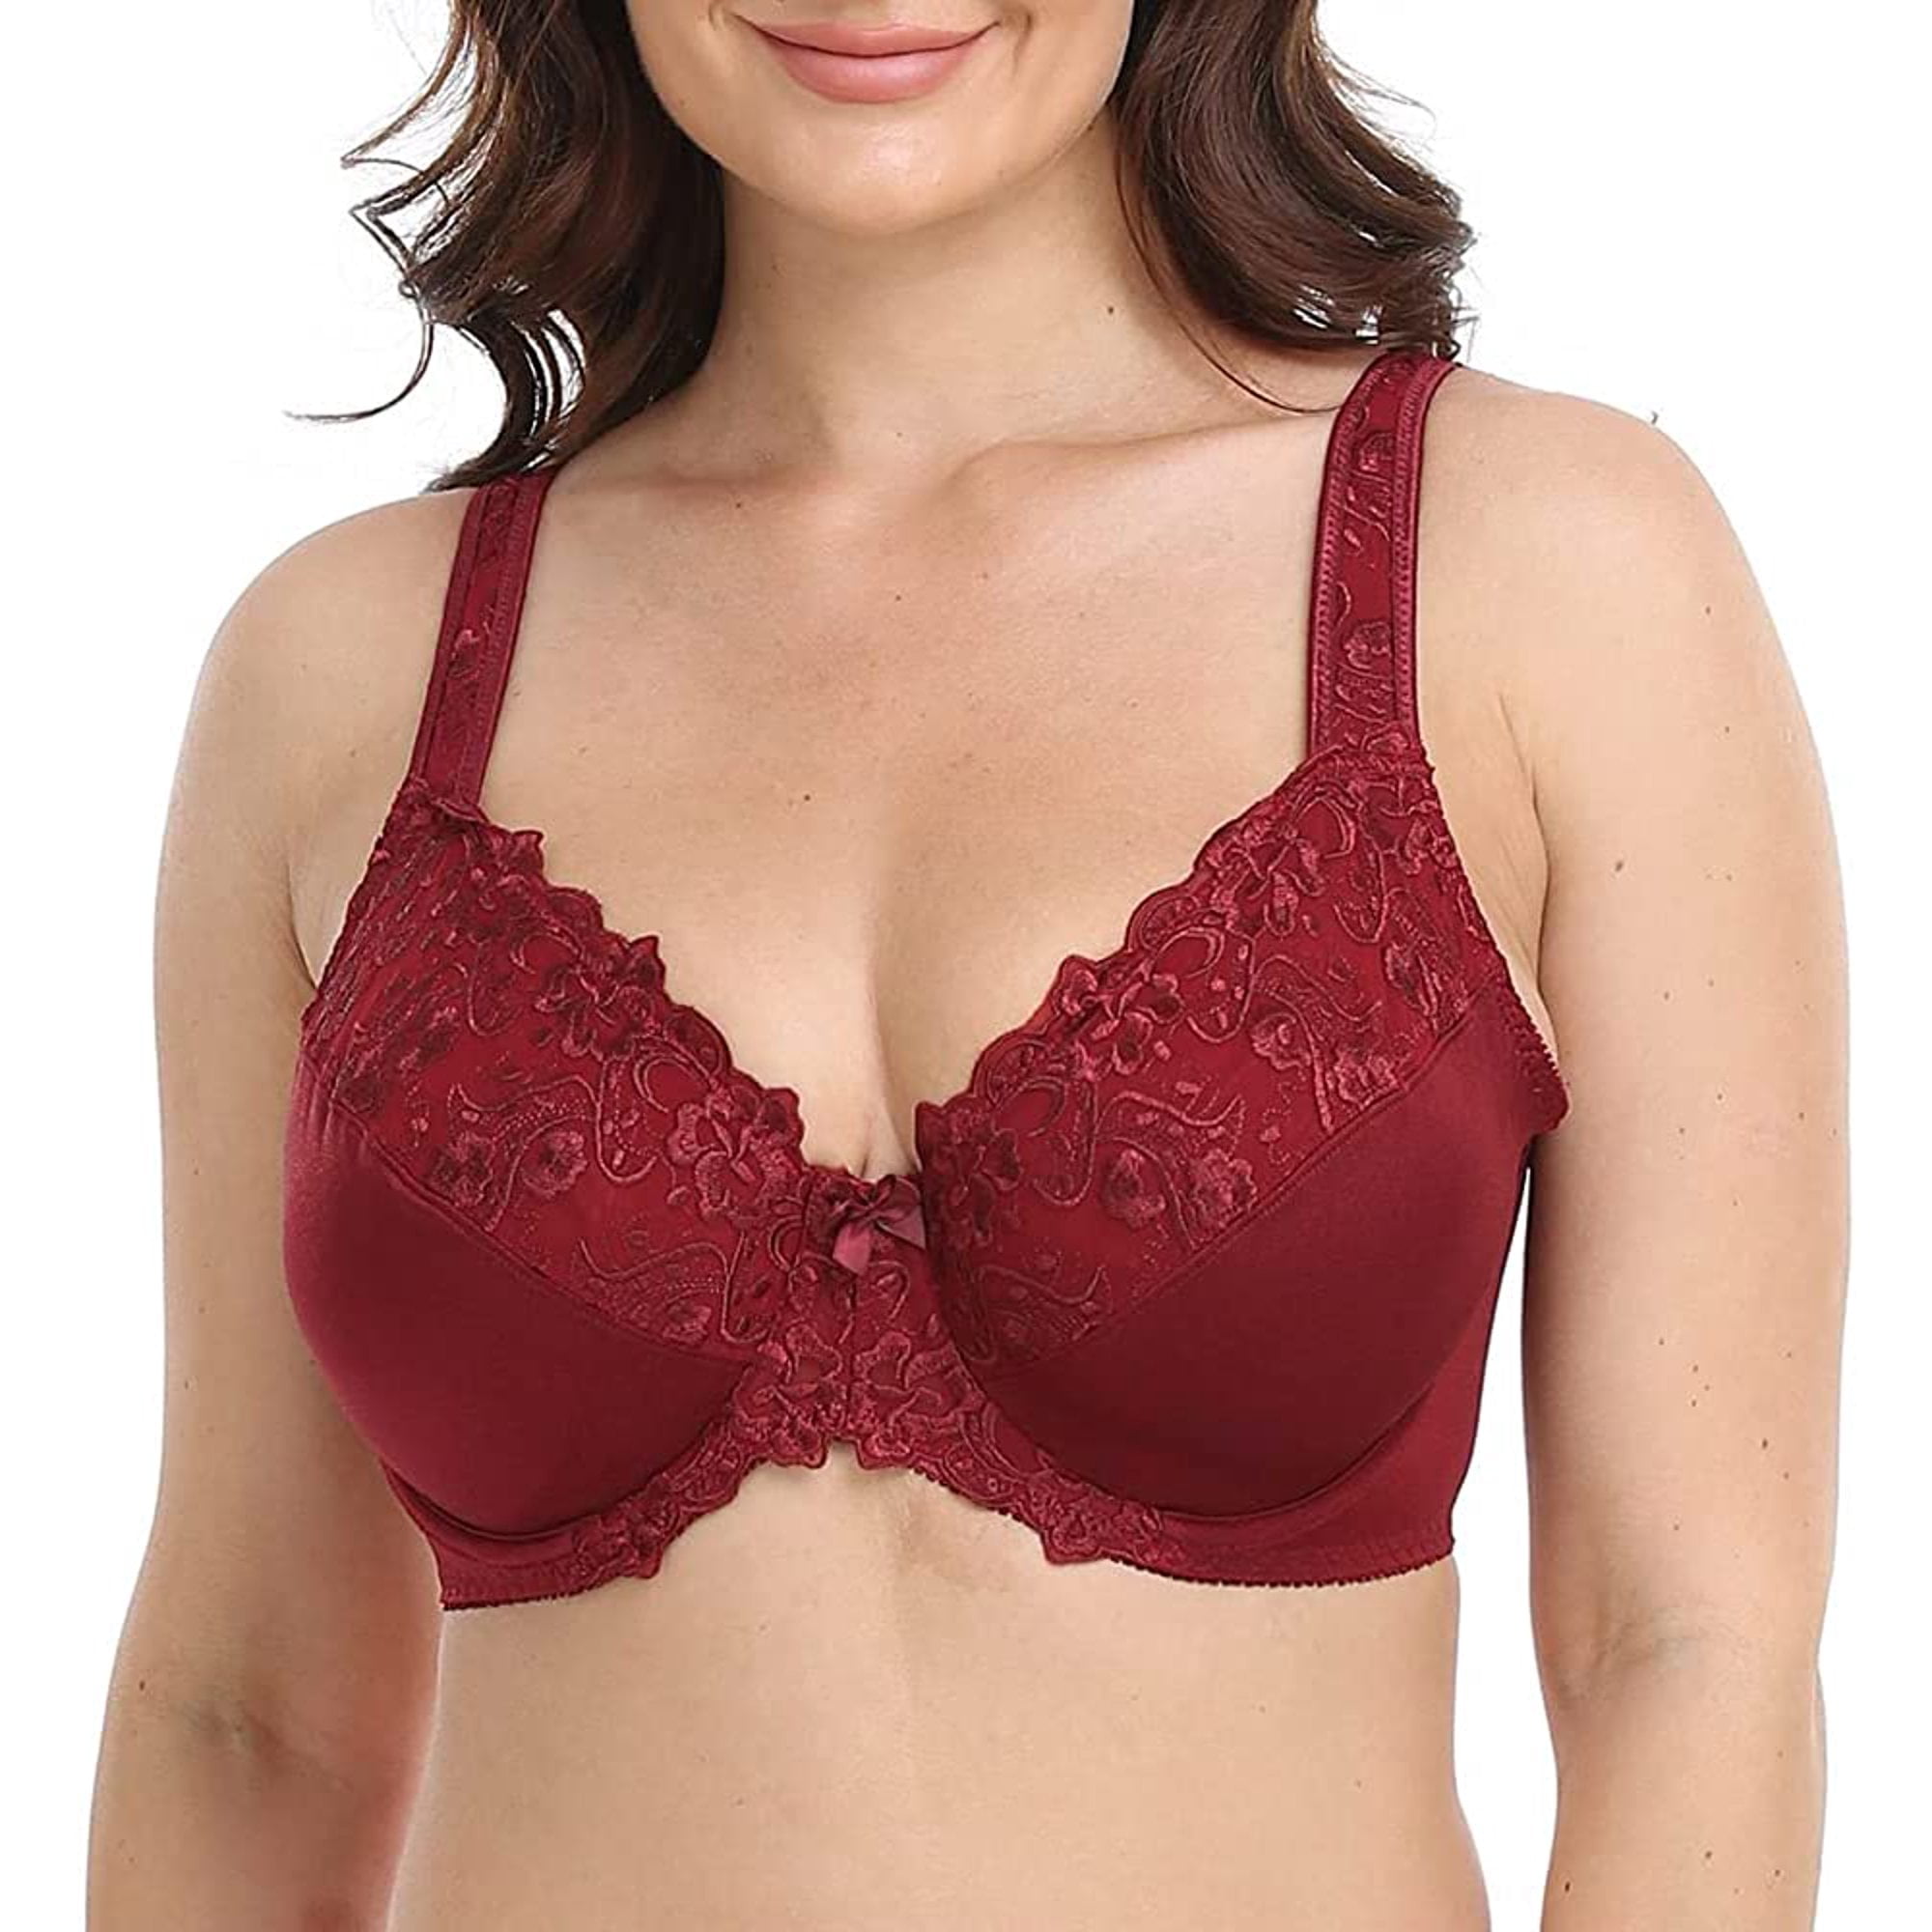  Womens Plus Size Bras Minimizer Seamless Unlined Cup Dark  Red Geometry 38D